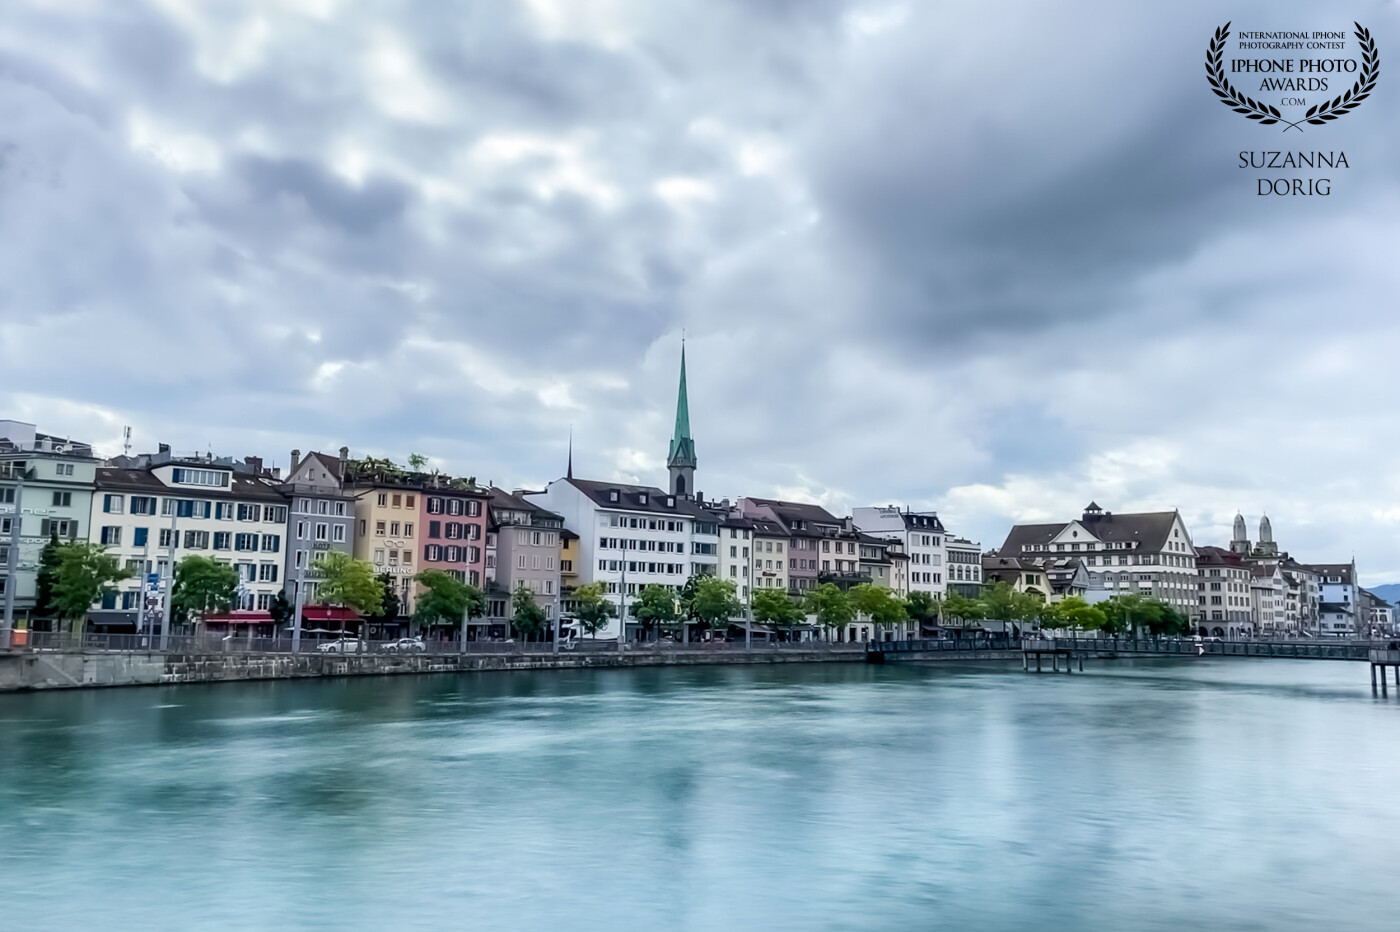 Even on a cloudy day the city of Zurich is beautiful. In this image the river Limmat is shown. It’s even possible to do a little sightseeing tour by boat. This tour, by the way, is still on bucket list 😉